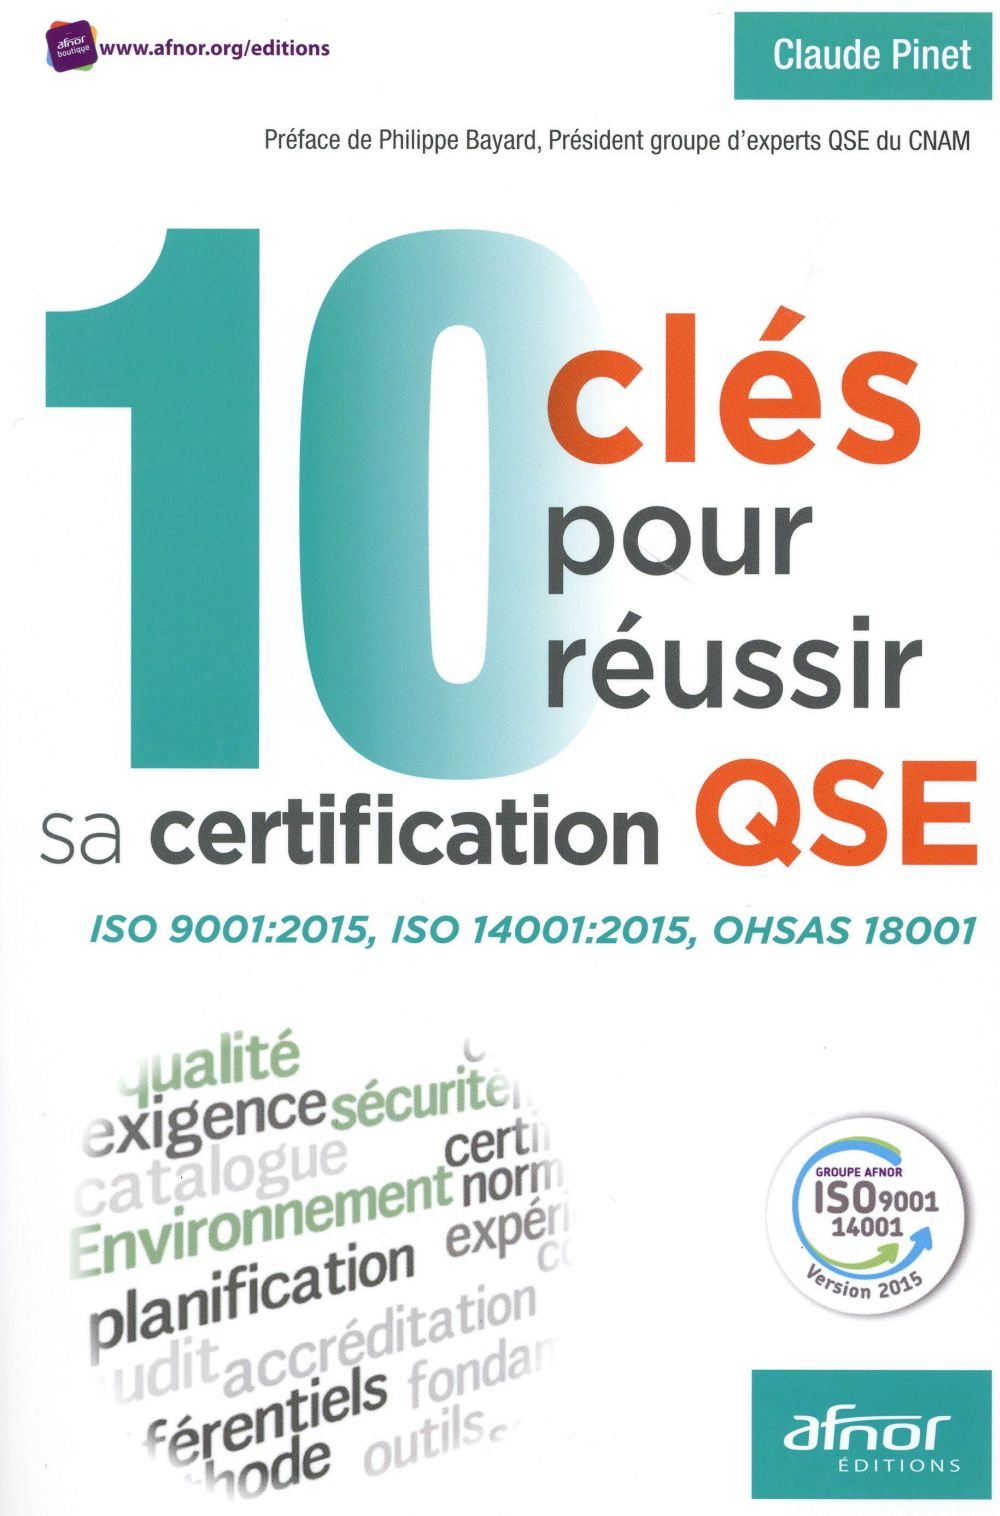 10 CLES POUR REUSSIR SA CERTIFICATION QSE - ISO 9001:2015, ISO 14001:2015, OHSAS 18001.